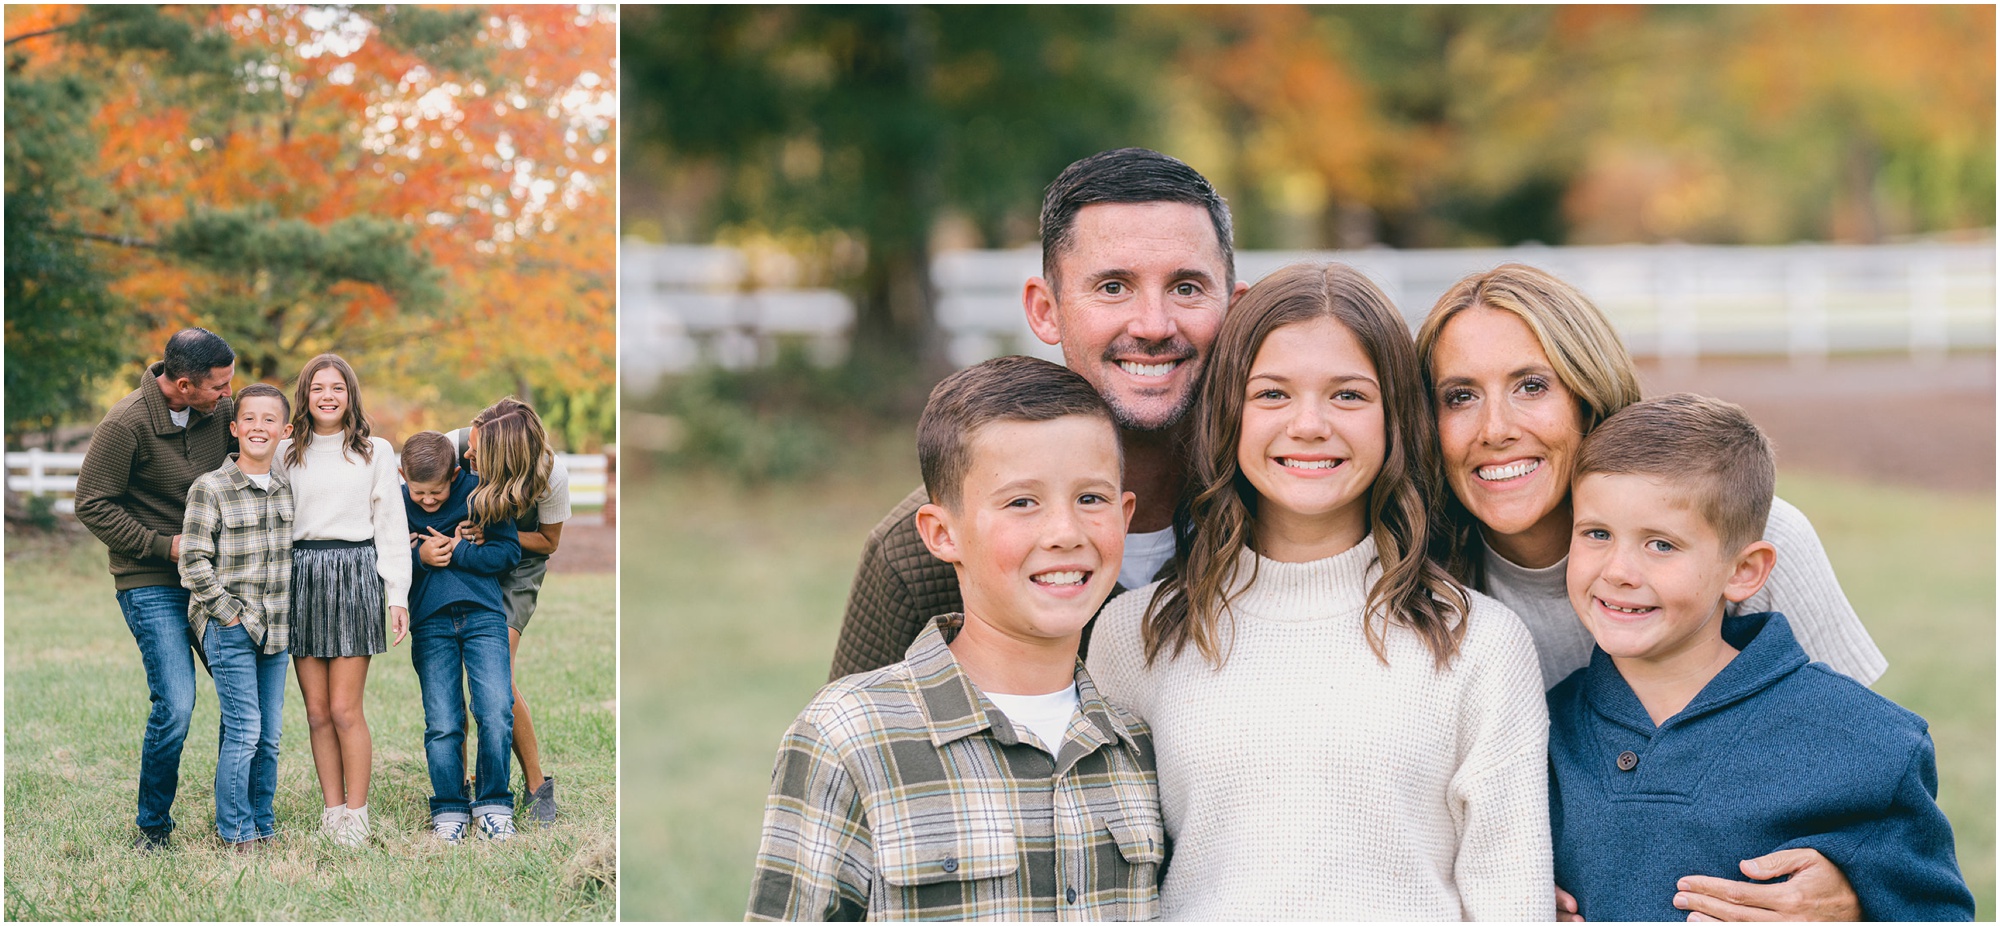 Atlanta fall family photographer takes portraits of a family of five in a green field with a white fence.